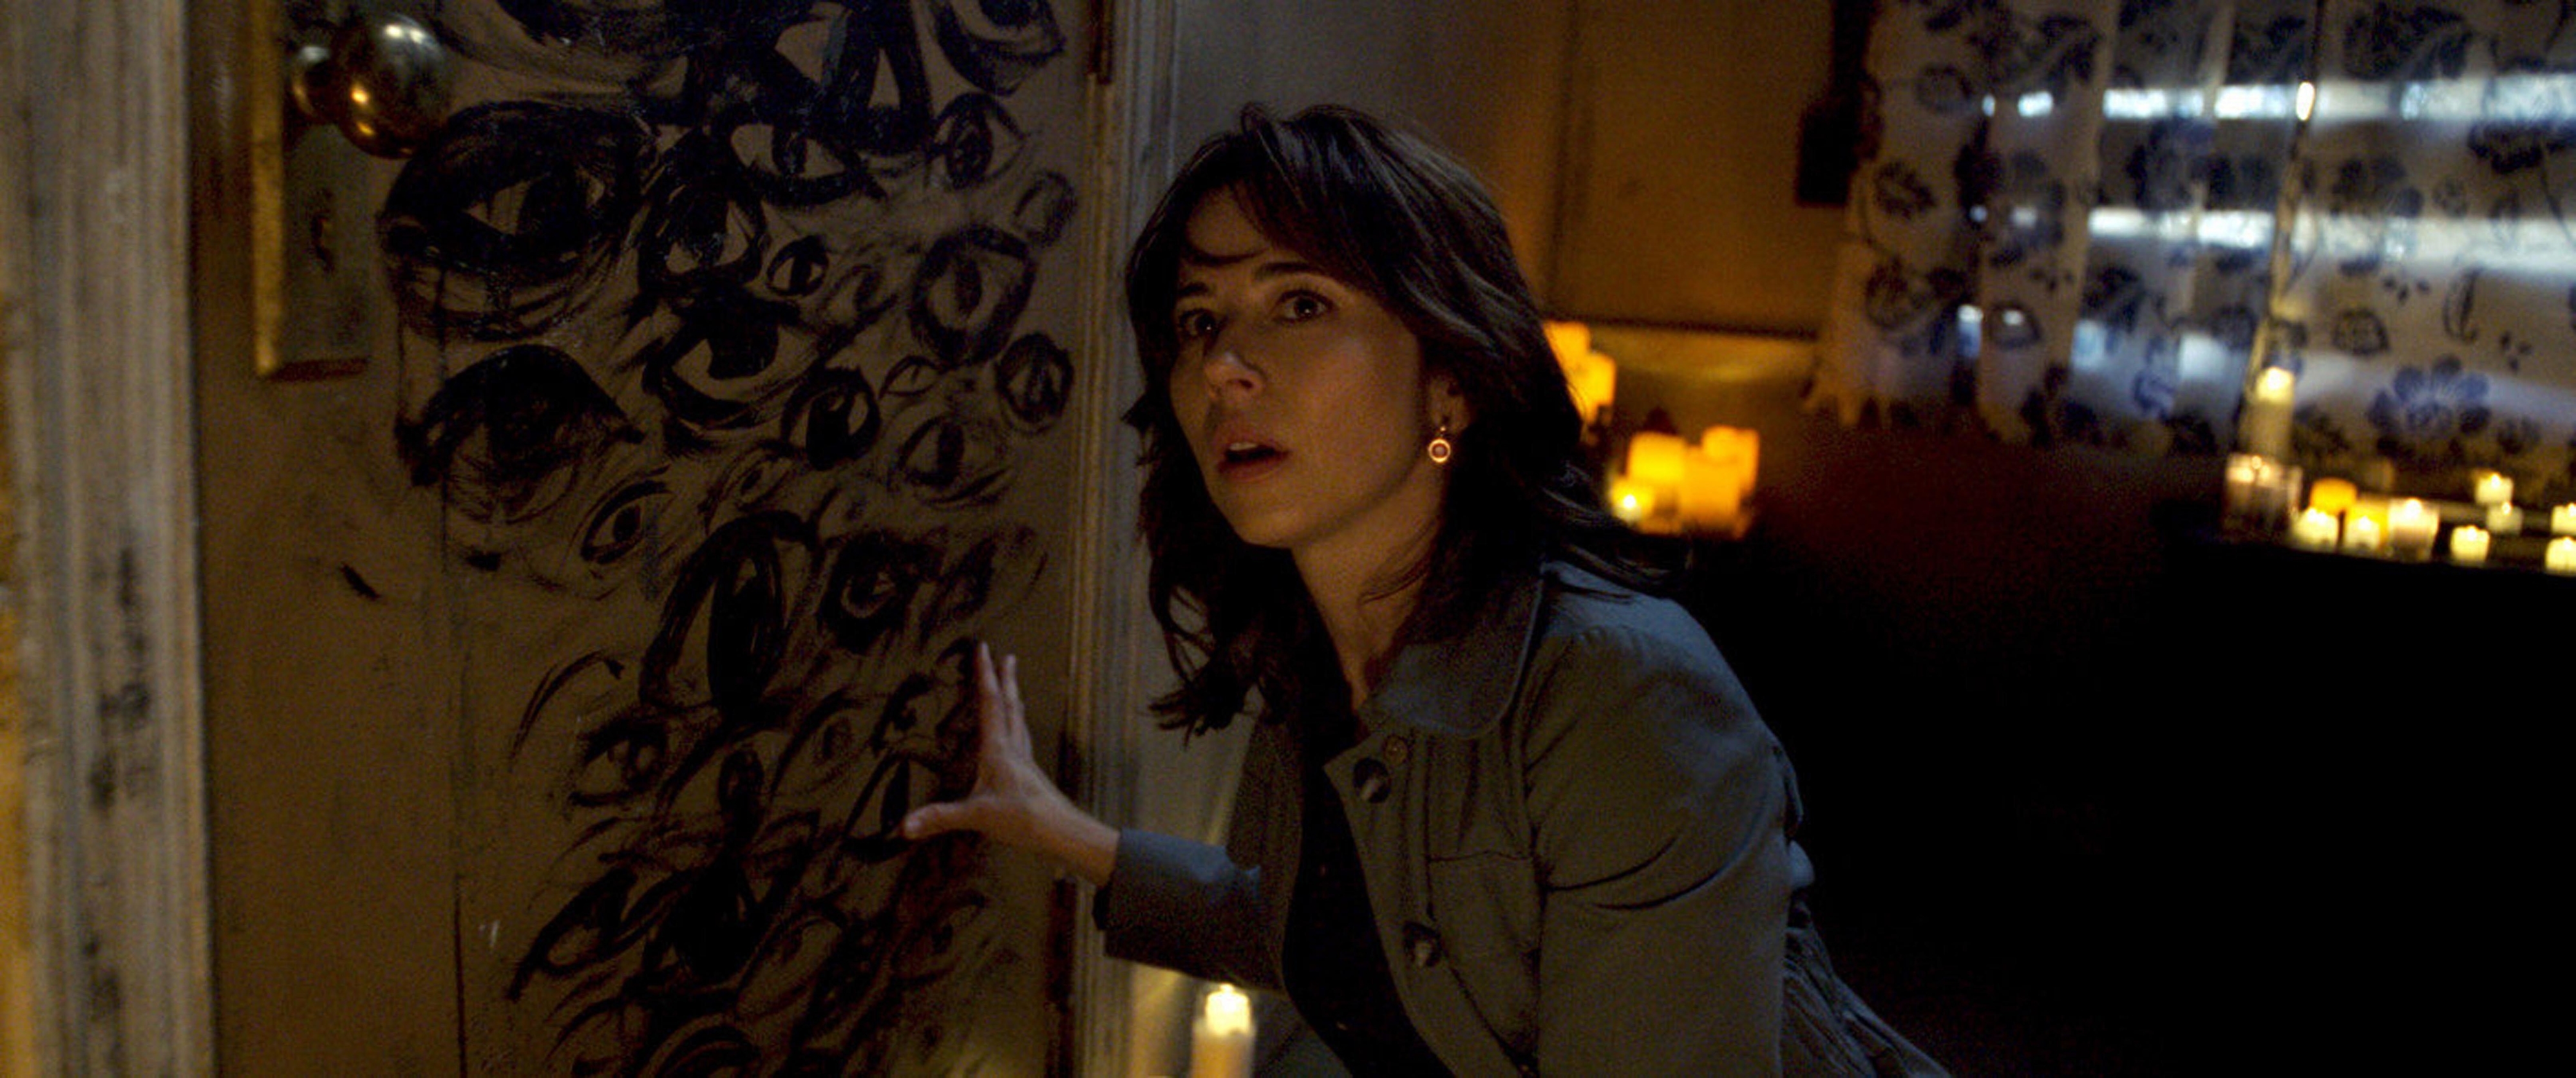 Linda Cardellini looks around a dirty room covered in candles and creepy markings